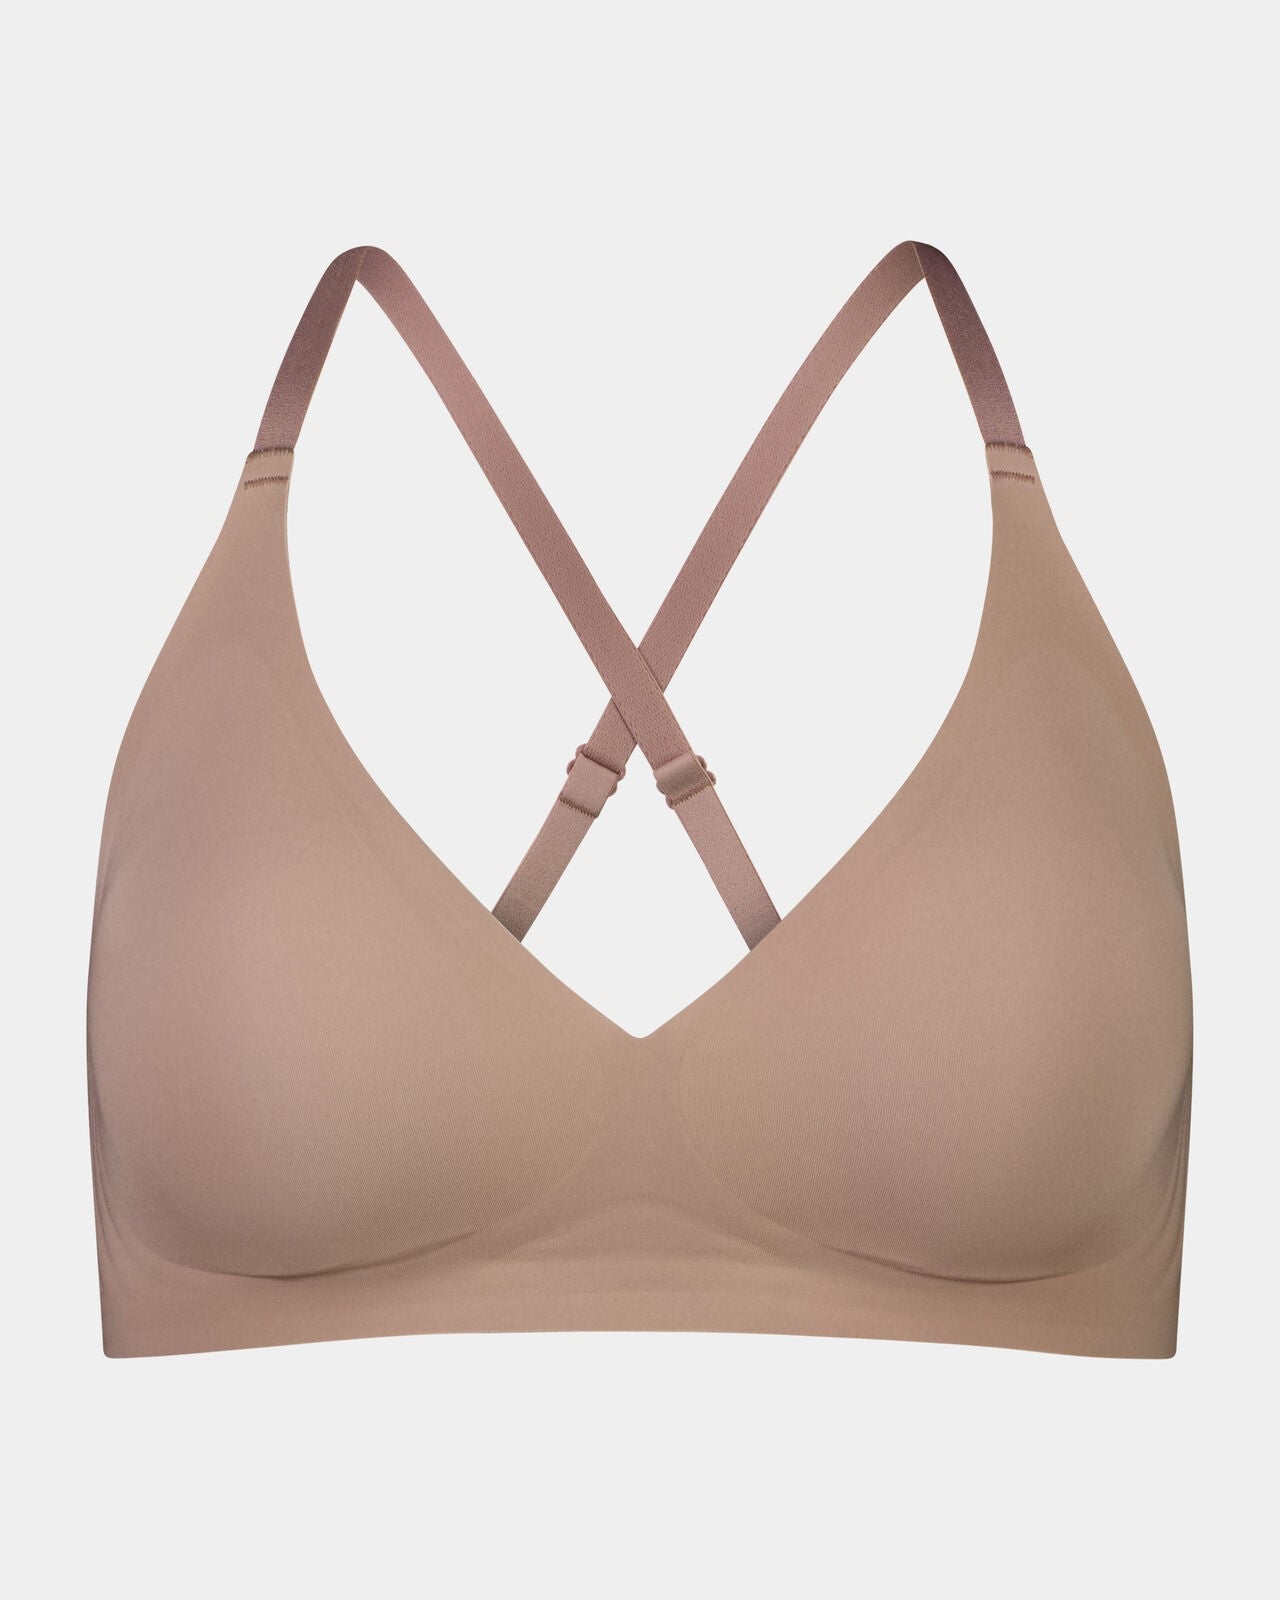 Bendon Comfit Collection Soft Cup Plu in Mocha